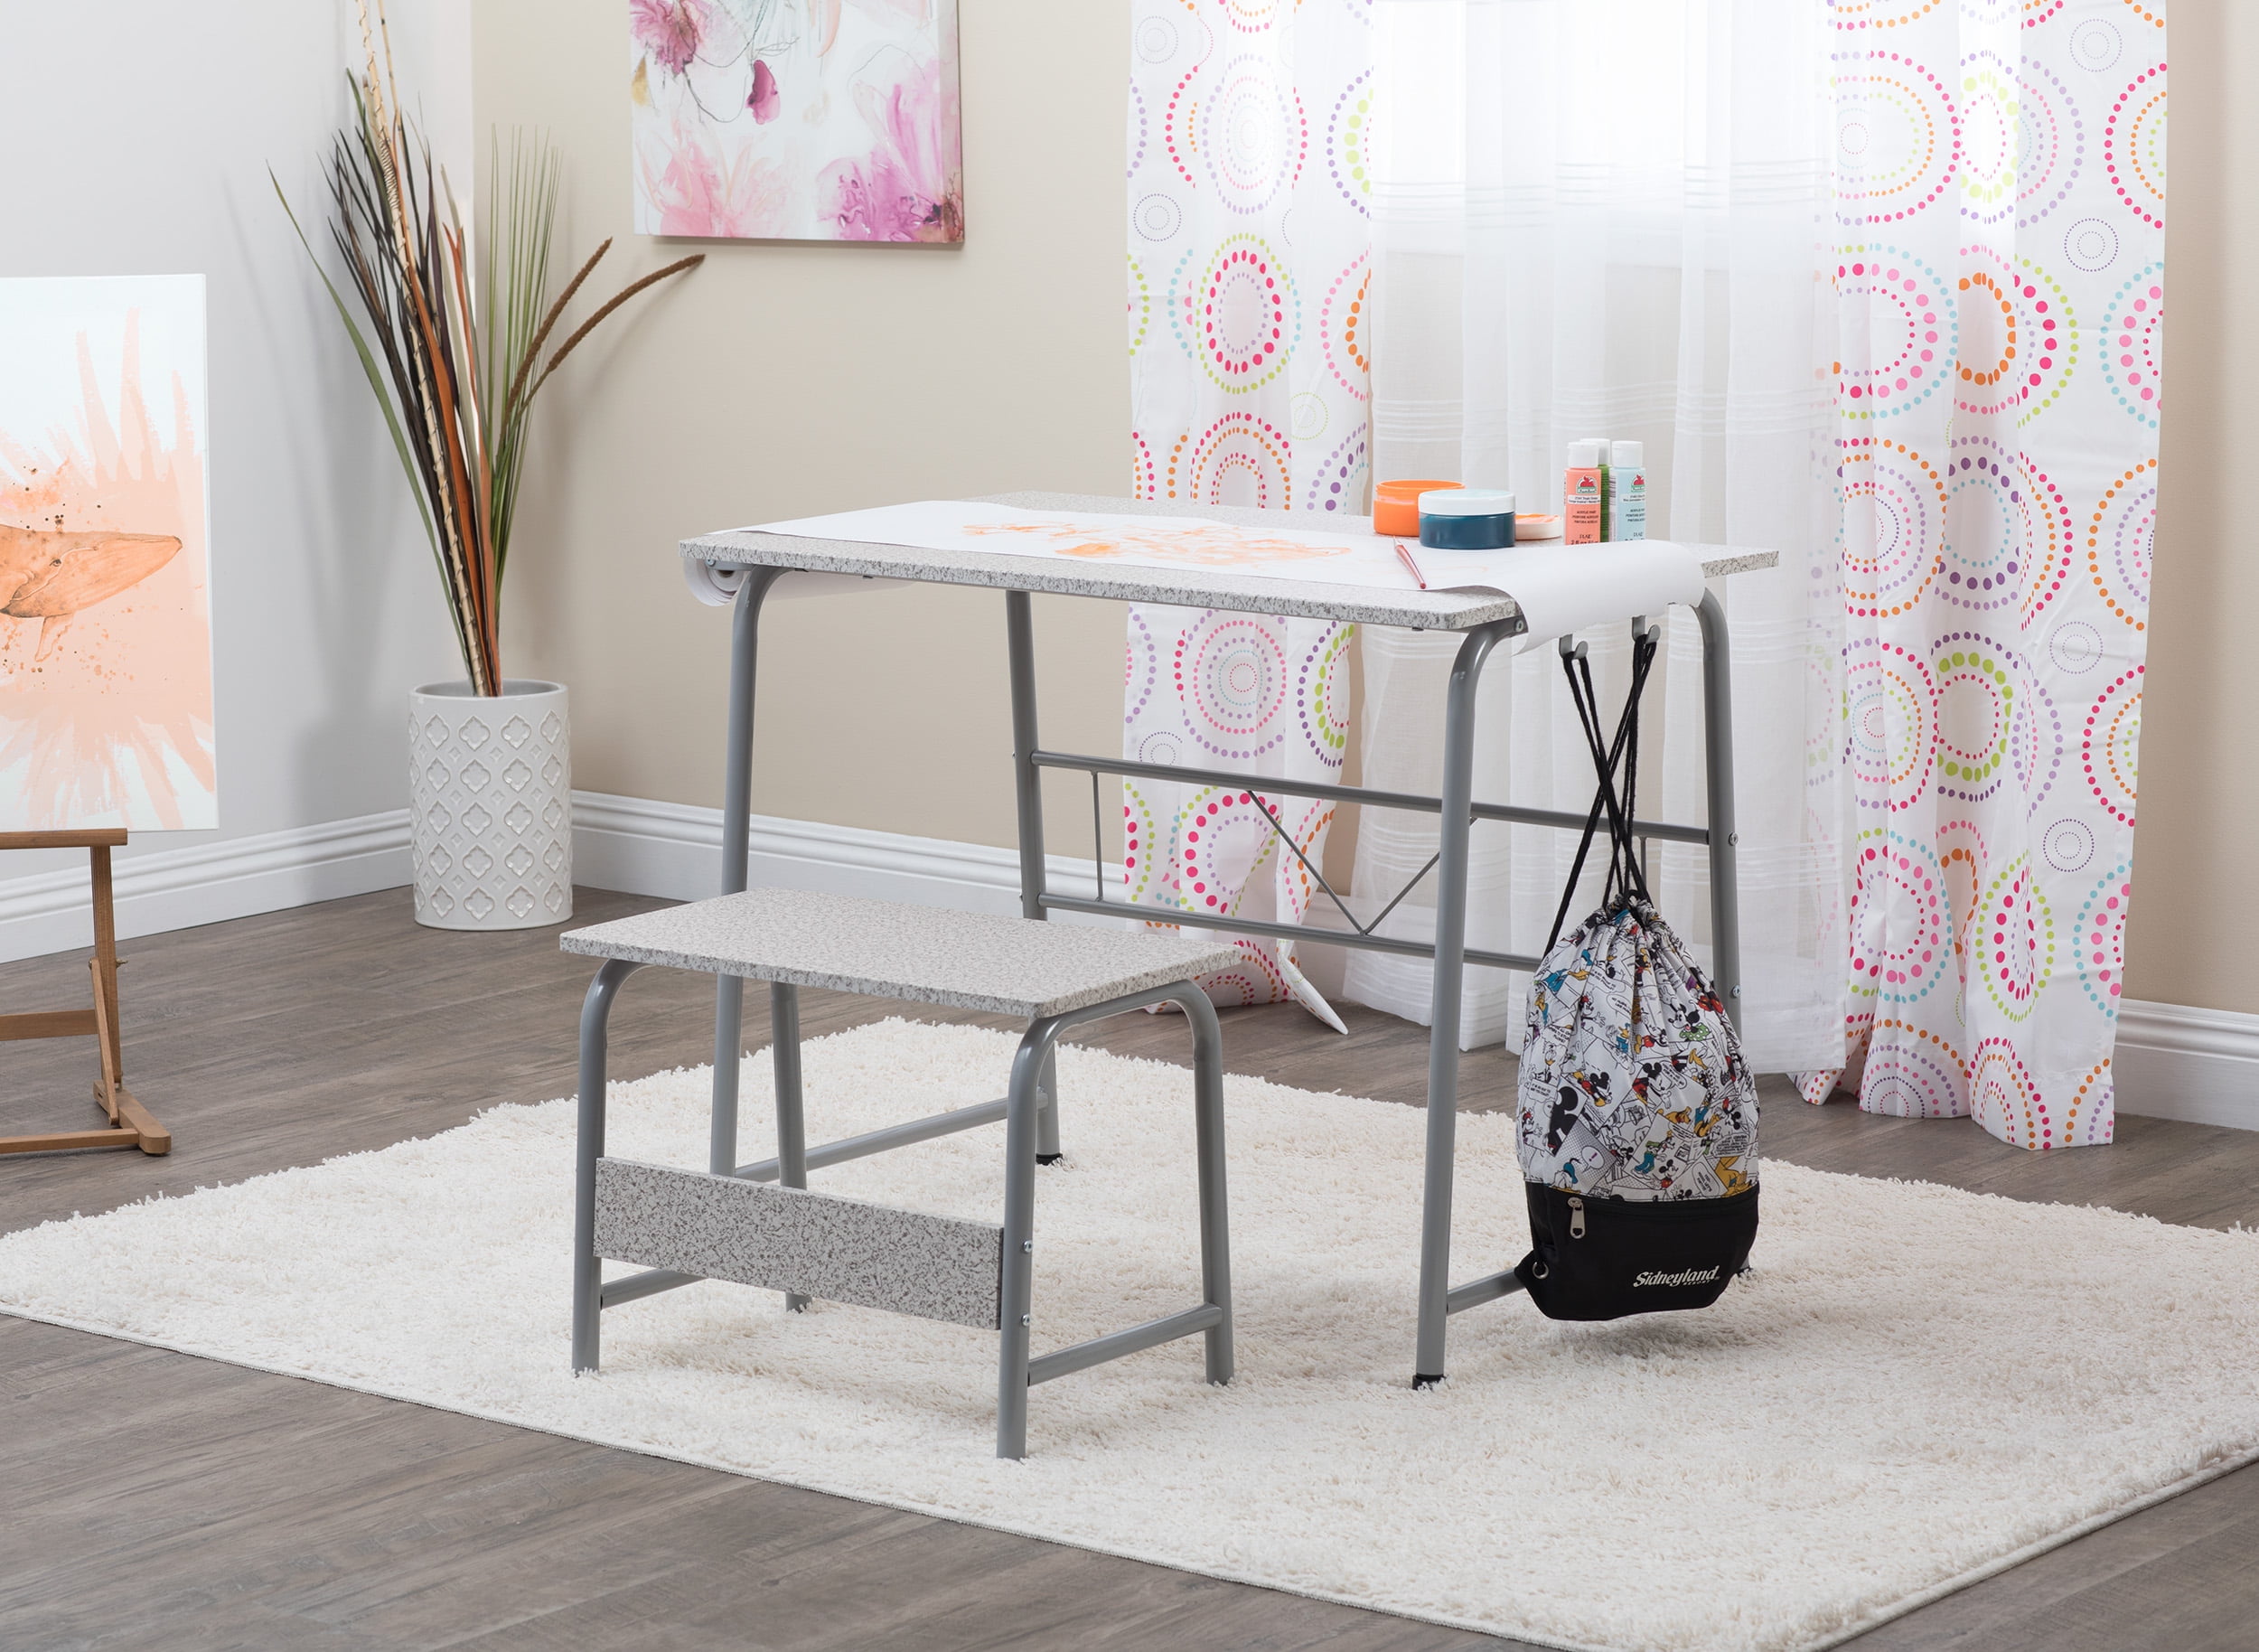 Portable and Foldable Crafting Table for Saving Space, Easily